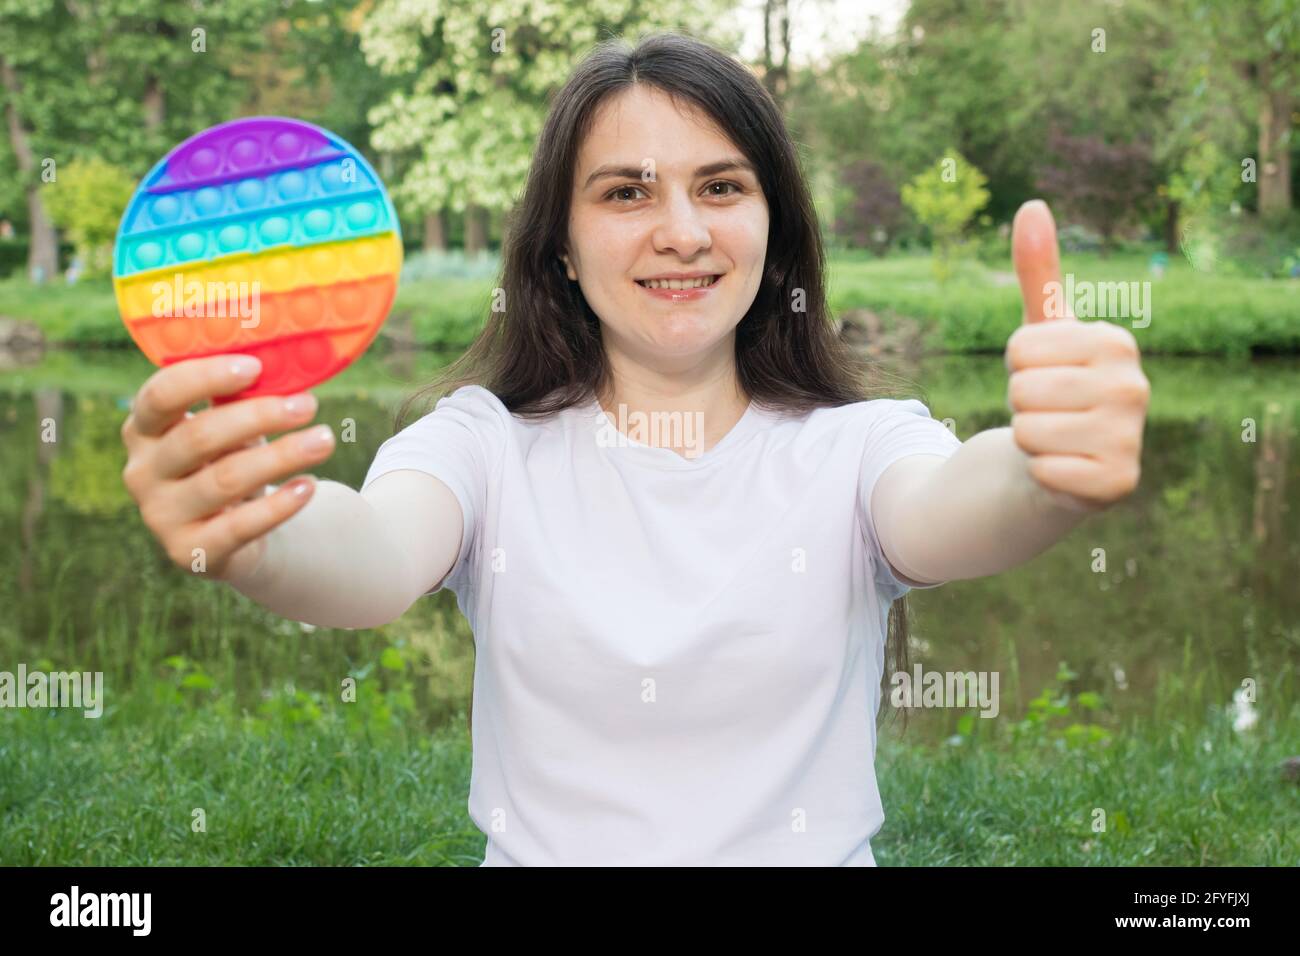 Brunette girl plays with a fashionable antistress toy pop it on nature. Trend 2021 is a sensitive reusable bubble wrap, a fun game against stress Stock Photo